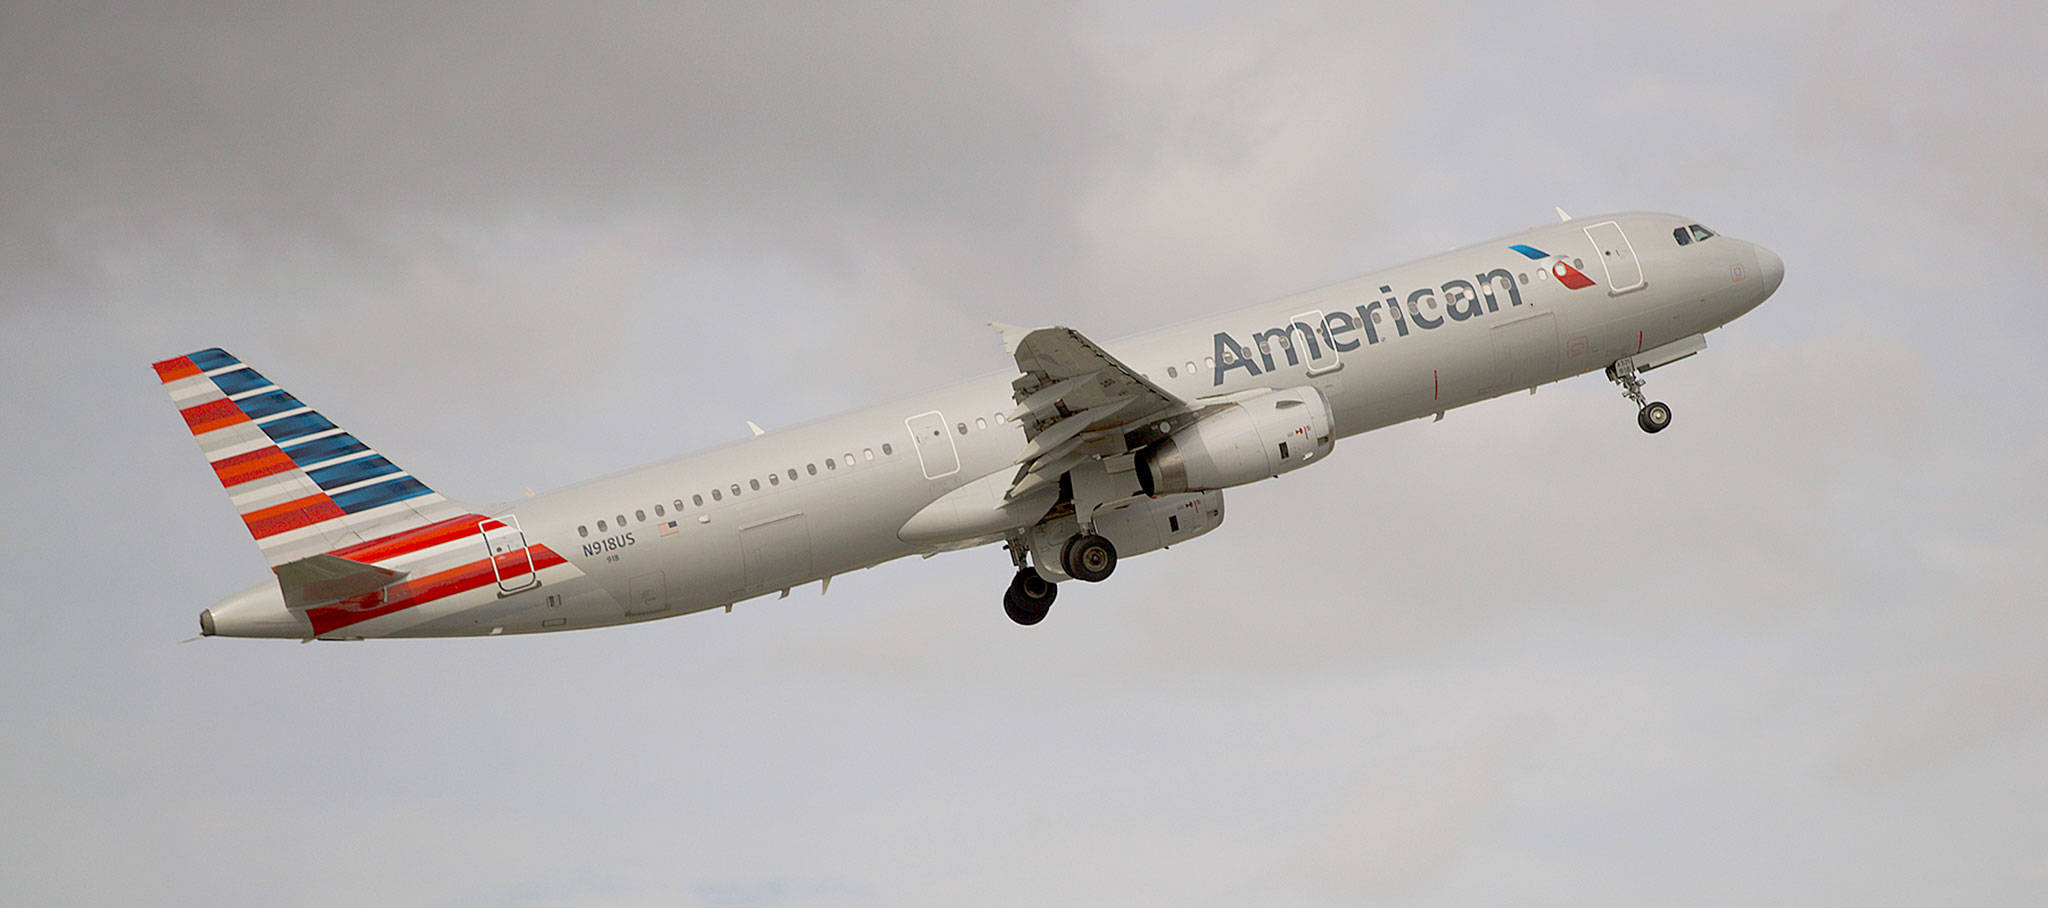 An American Airlines Airbus A321 takes off from Fort Lauderdale–Hollywood International Airport in Fort Lauderdale, Florida. (AP Photo/Wilfredo Lee)